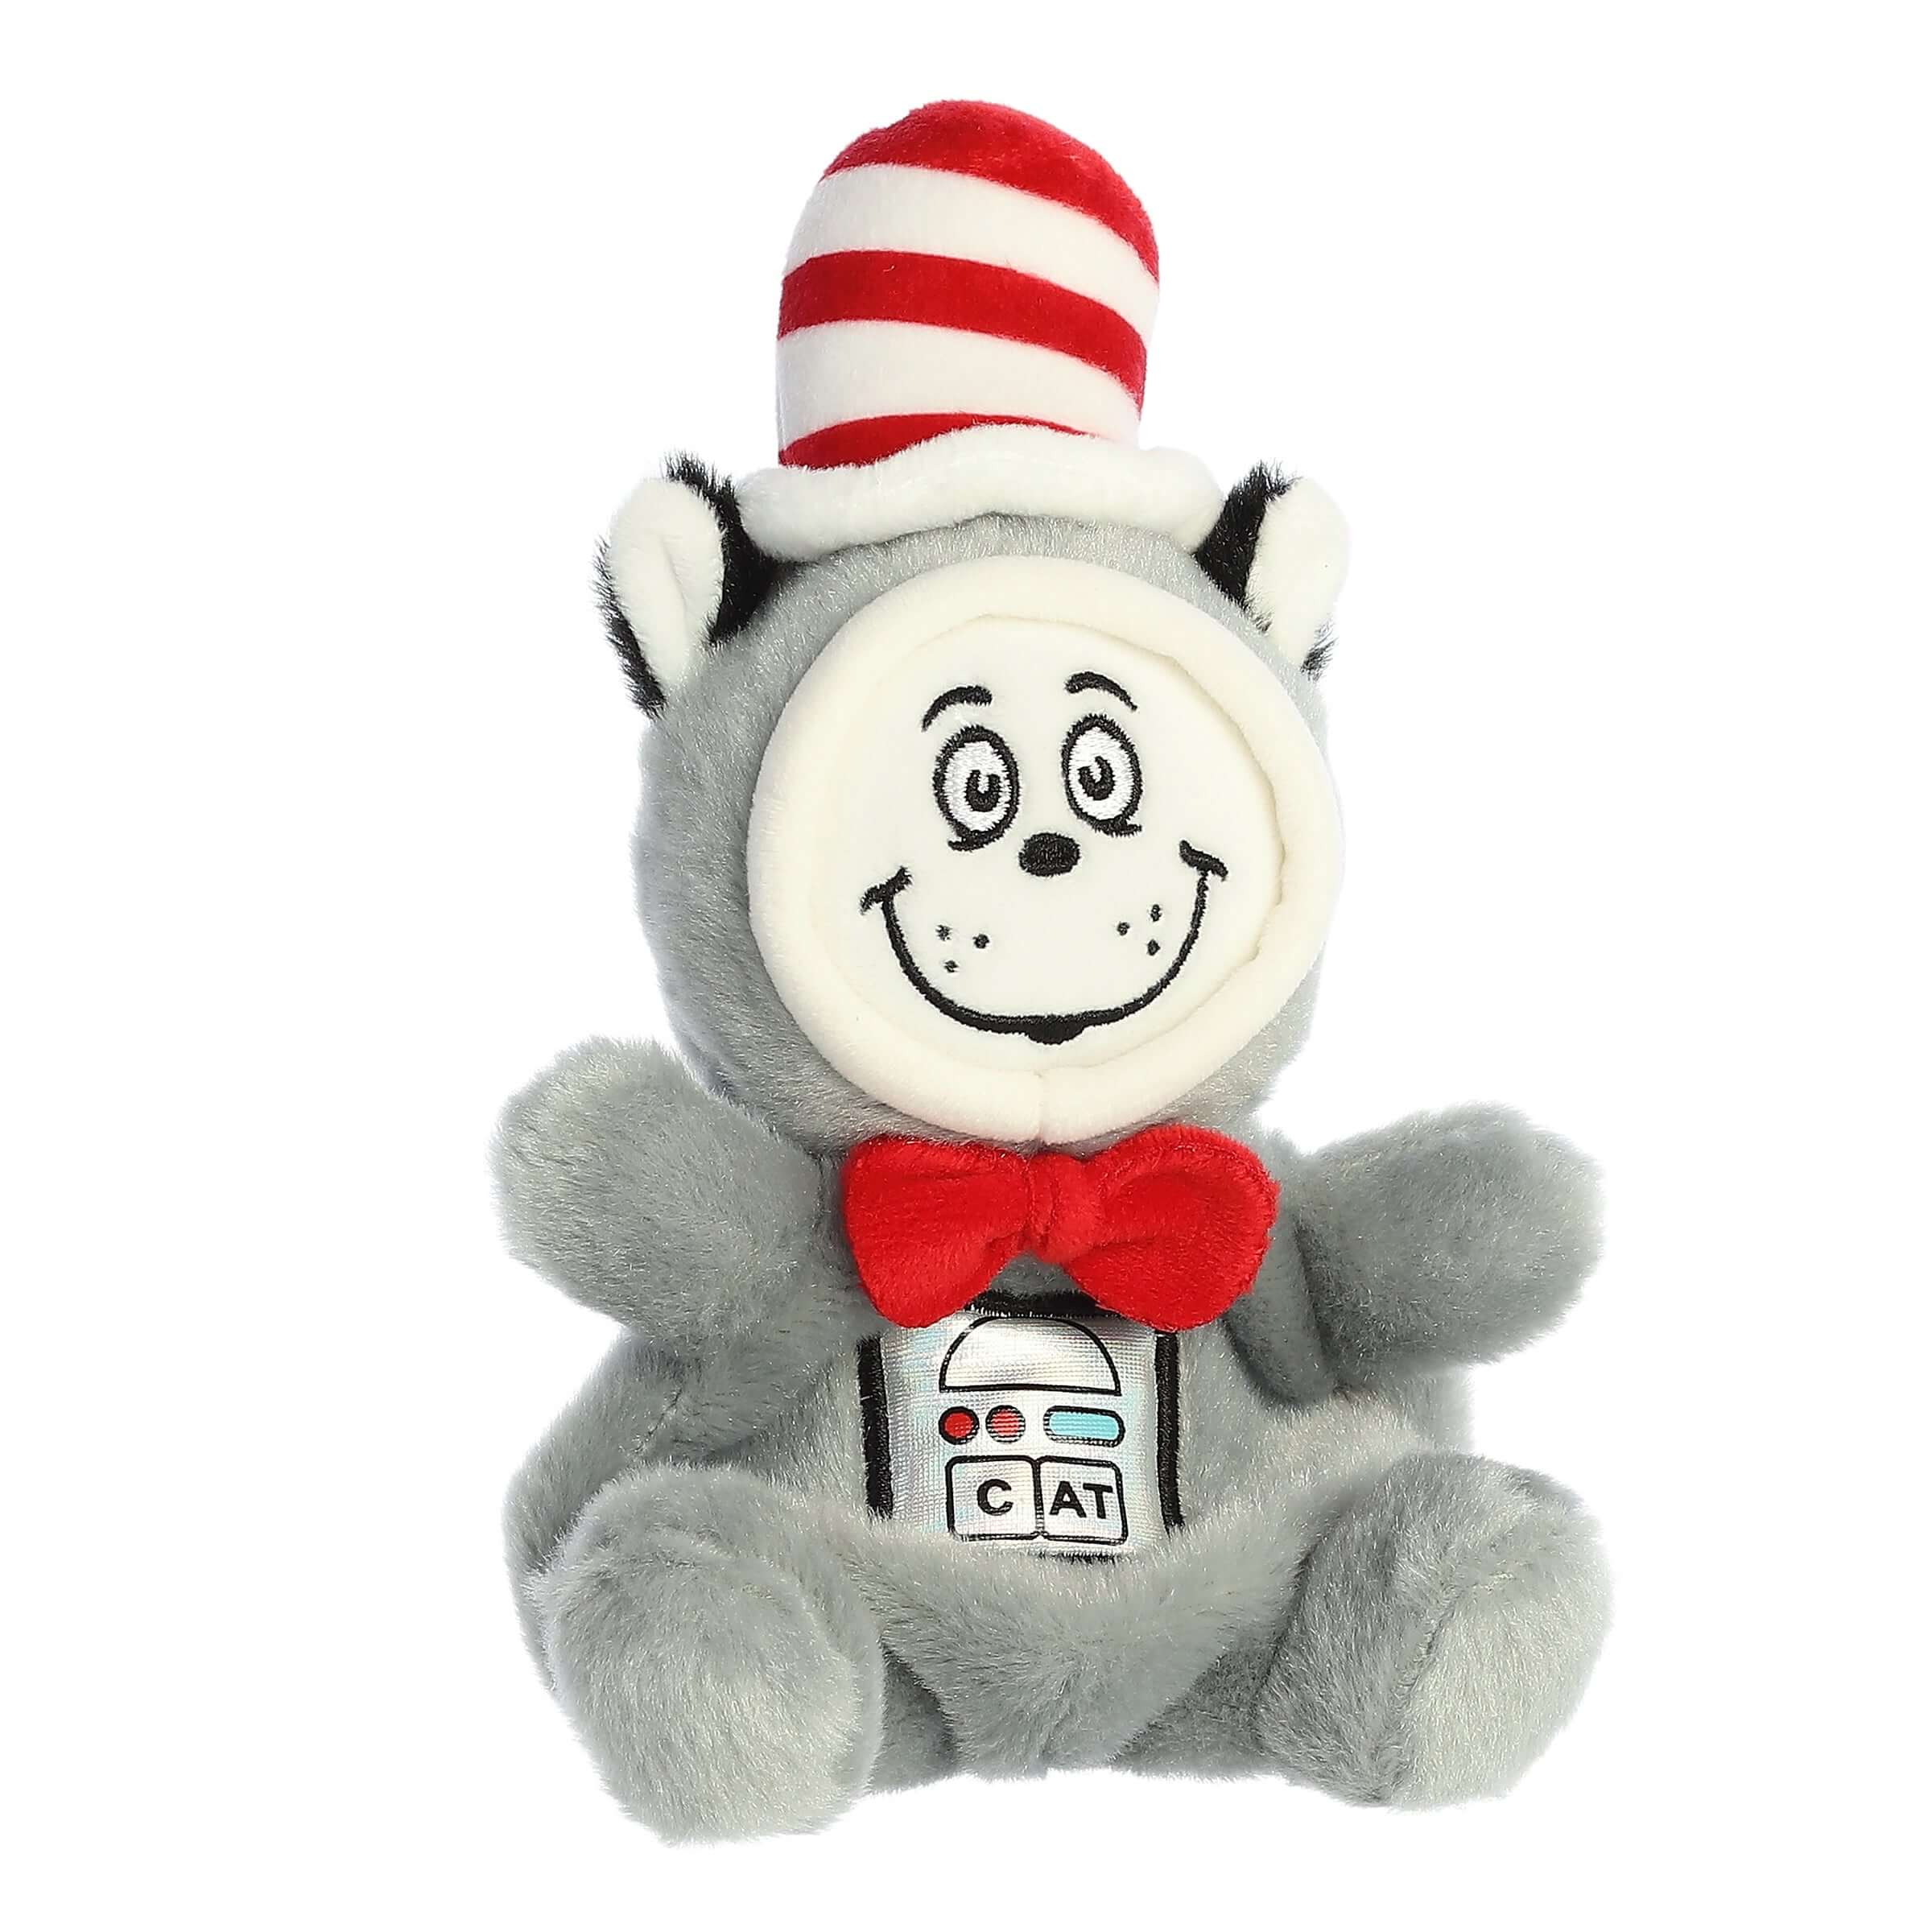 Palm Pals Dr. Seuss Astronaut Cat in the Hat 5" Stuffed Animal